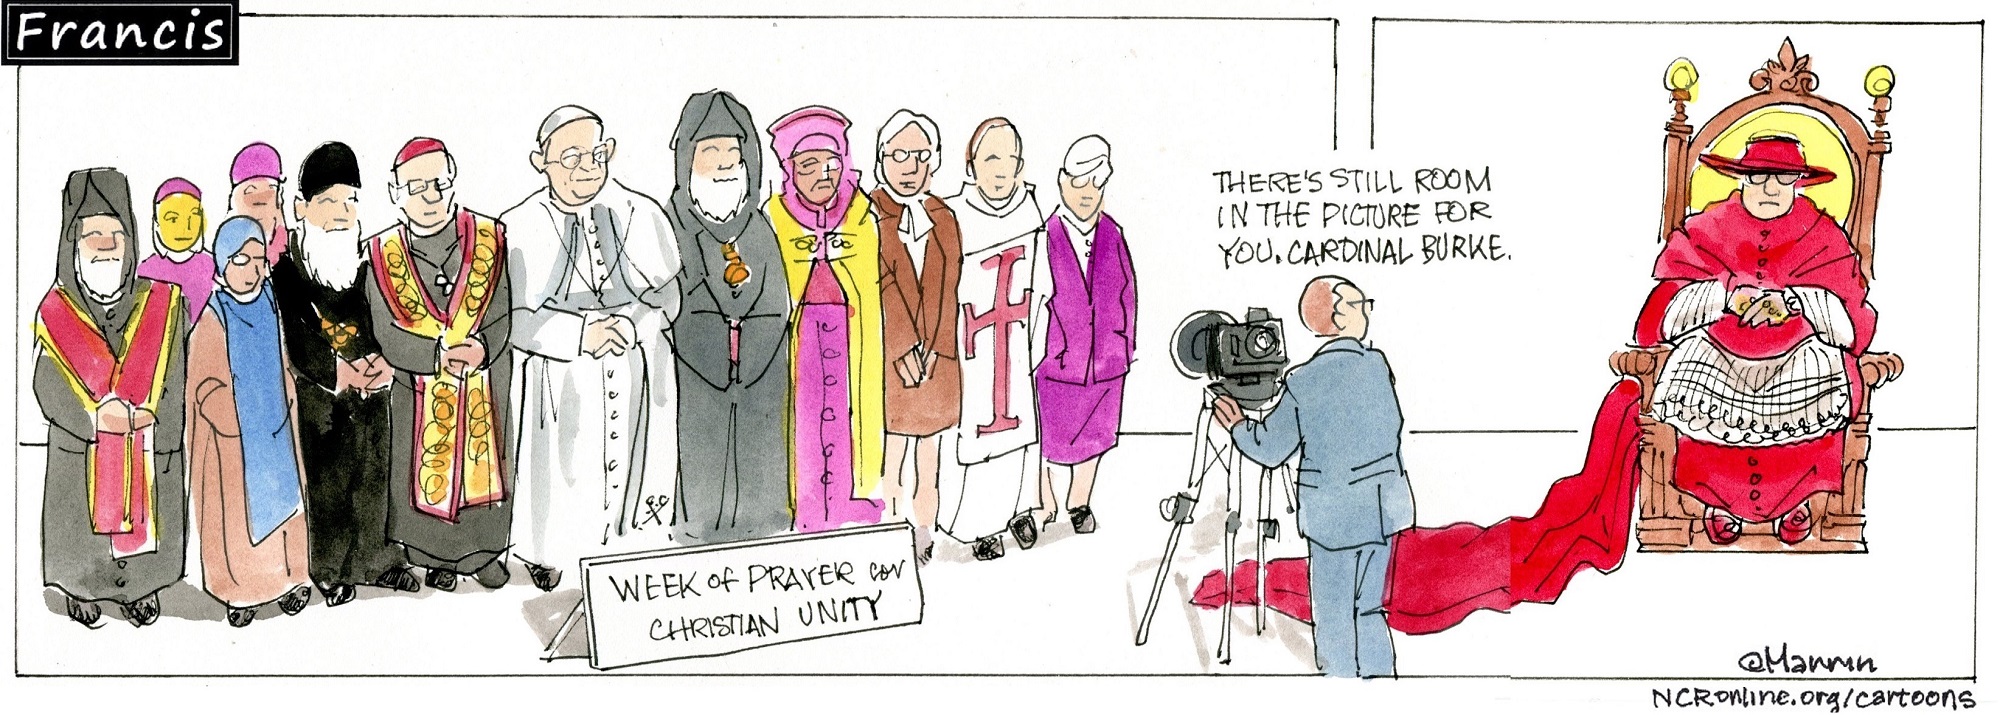 Francis, the comic strip: A special guest is invited to join in praying for Christian unity.